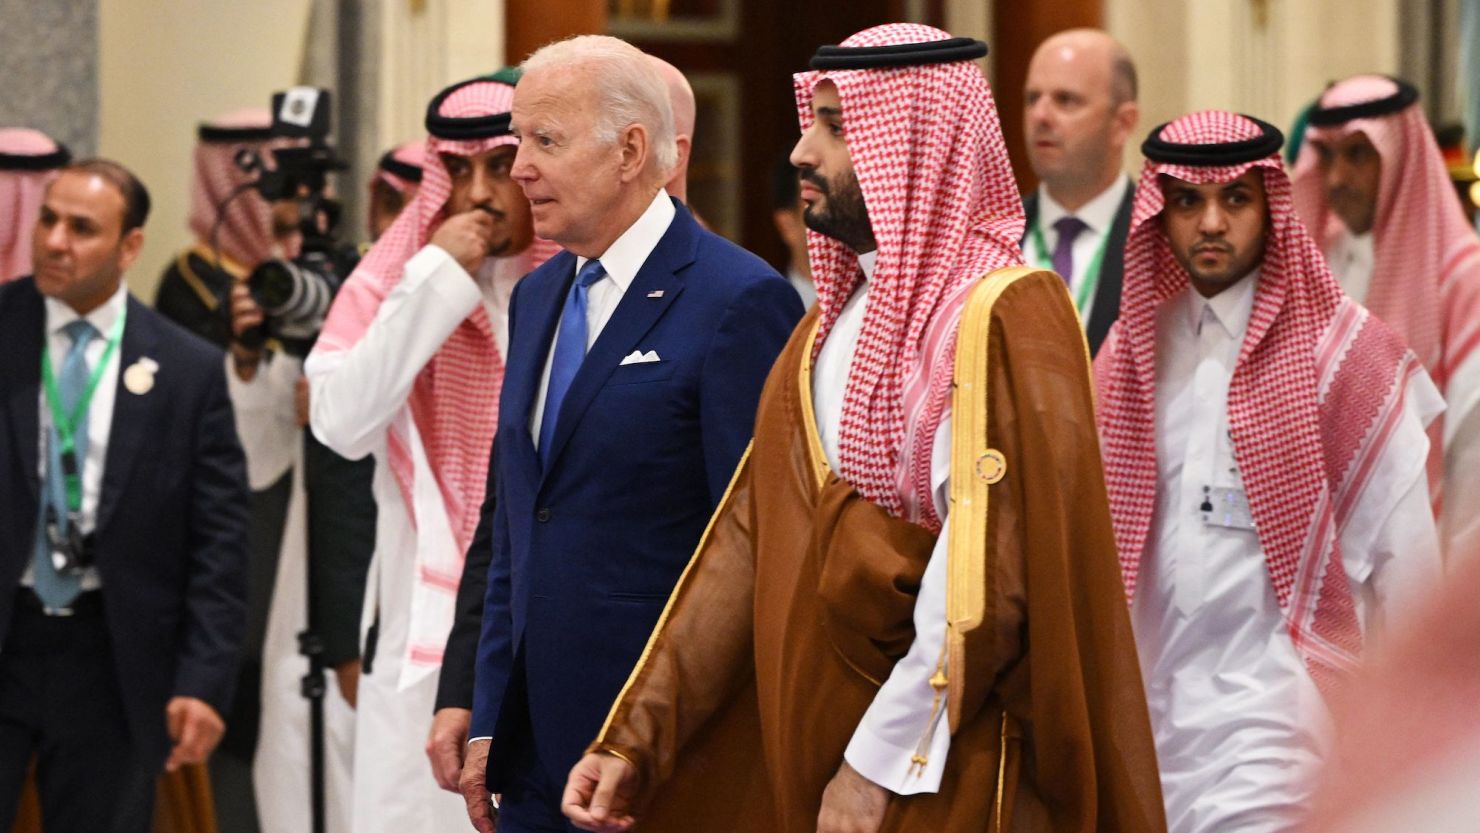 US President Joe Biden (L) and Saudi Crown Prince Mohammed bin Salman (R) arrive for the family photo during the Jeddah Security and Development Summit (GCC+3) at a hotel in Saudi Arabia's Red Sea coastal city of Jeddah on July 16, 2022. (Photo by MANDEL NGAN / POOL / AFP) (Photo by MANDEL NGAN/POOL/AFP via Getty Images)